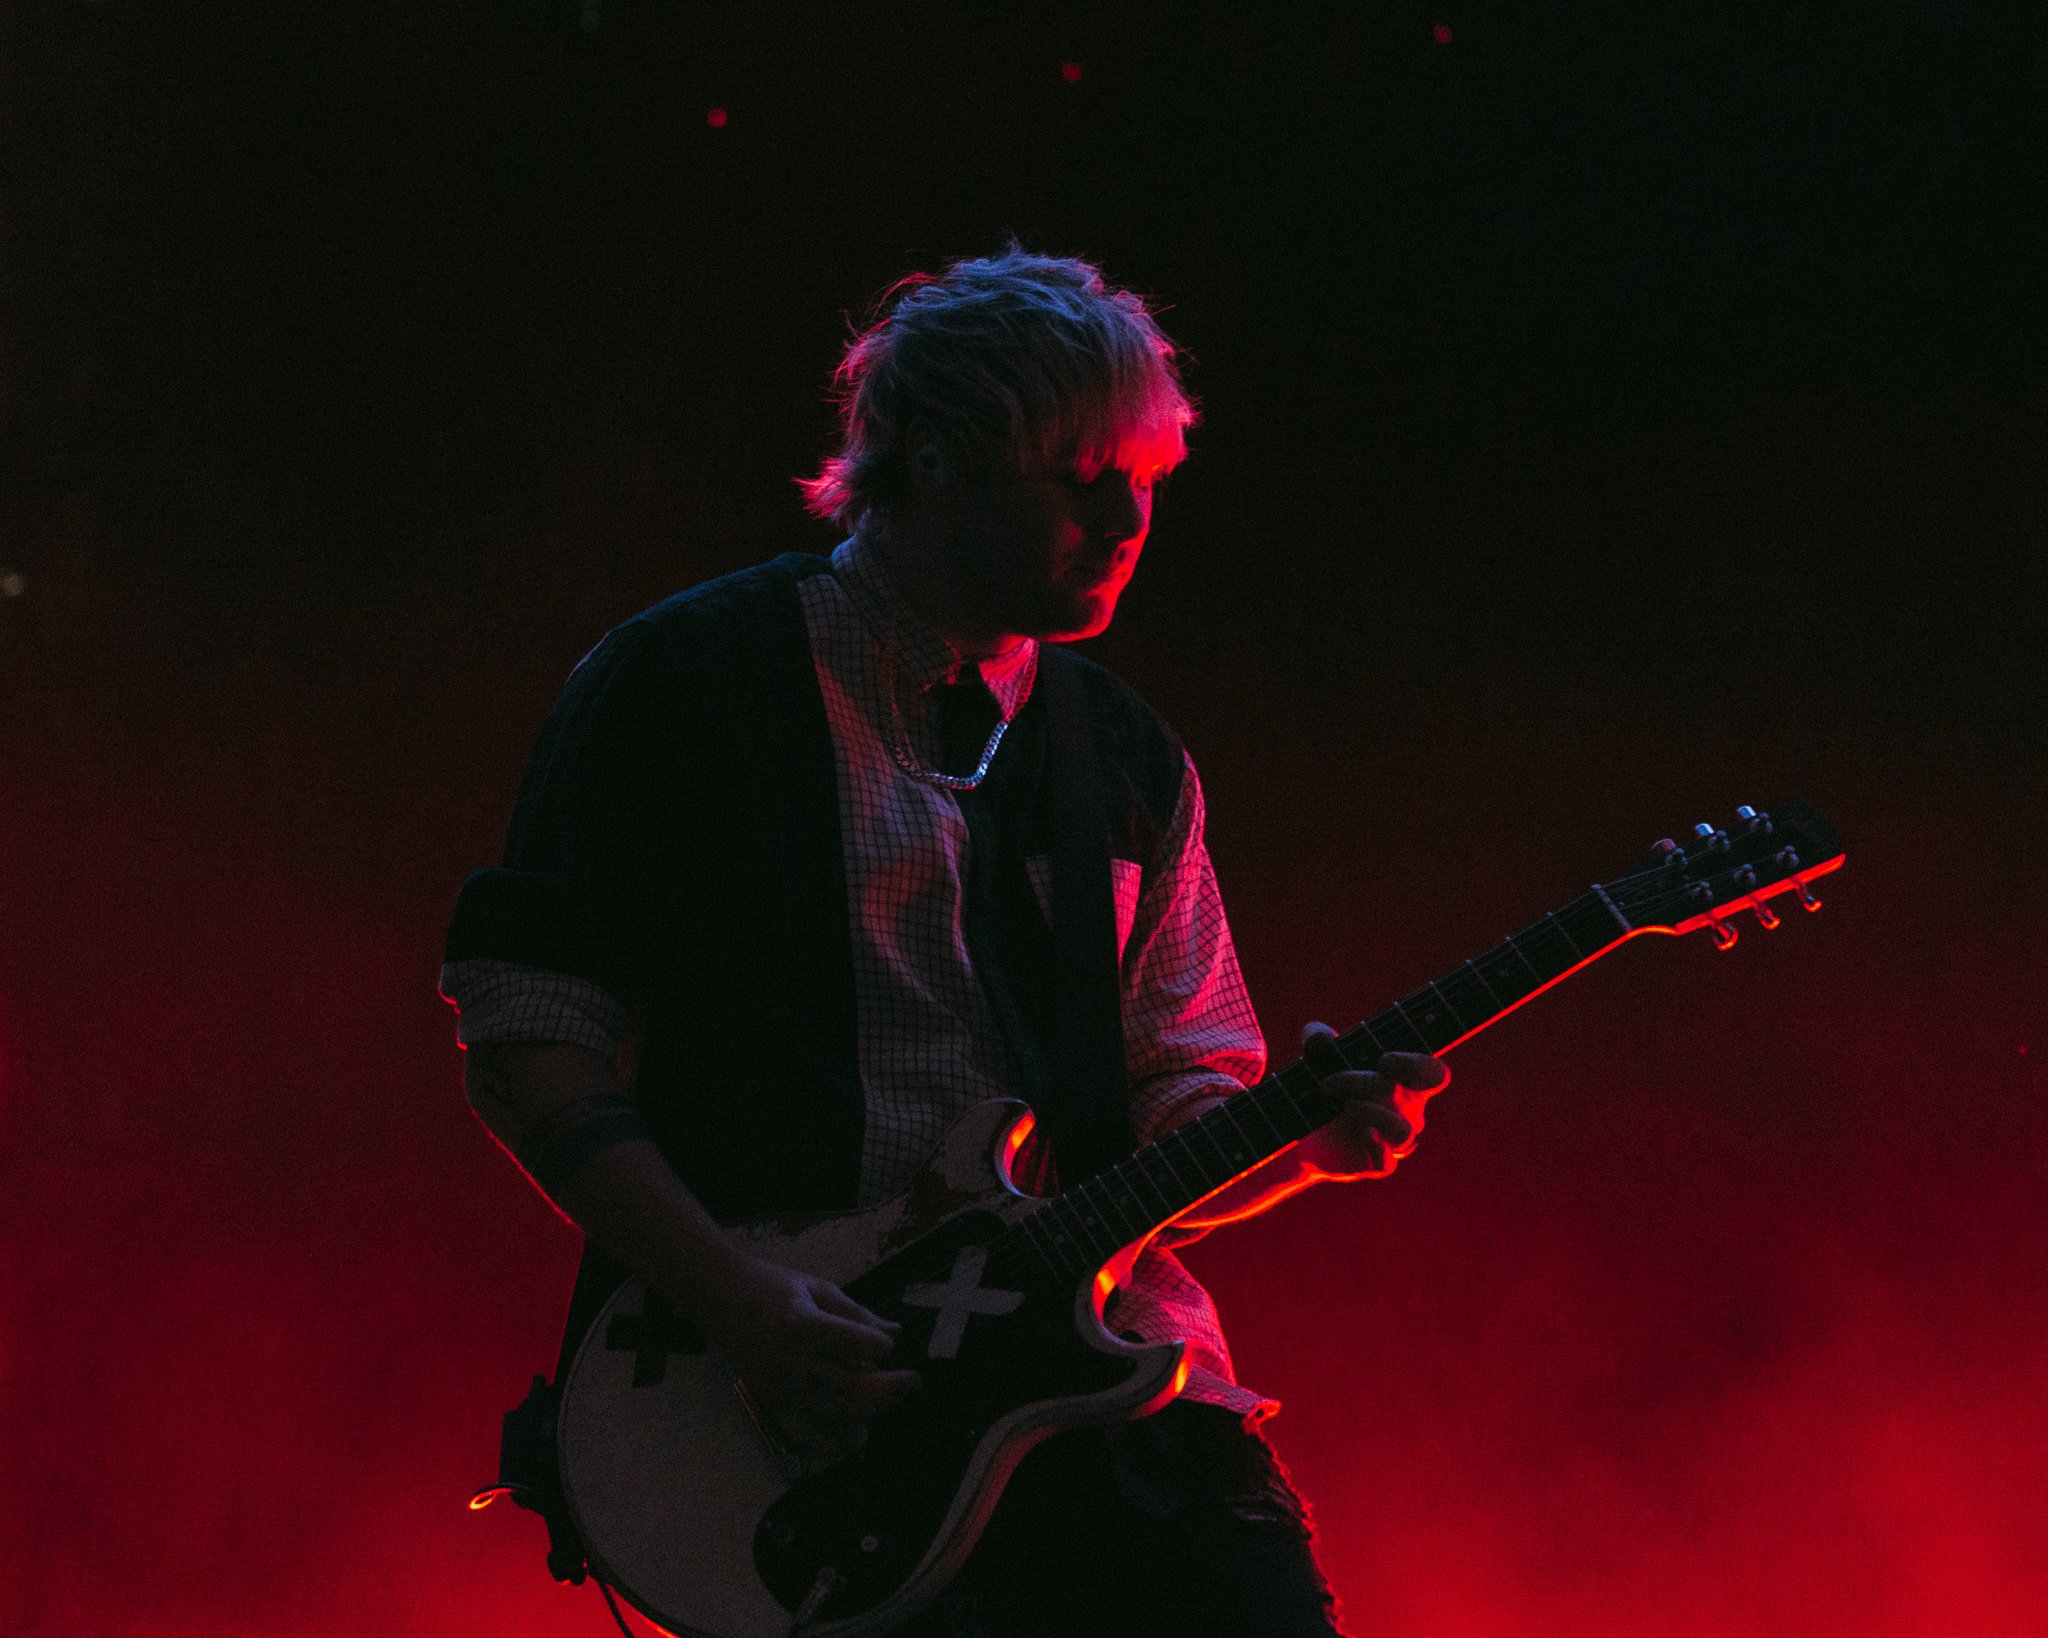  Guitarist Michael Clifford feels the music as the band performs “More .”  